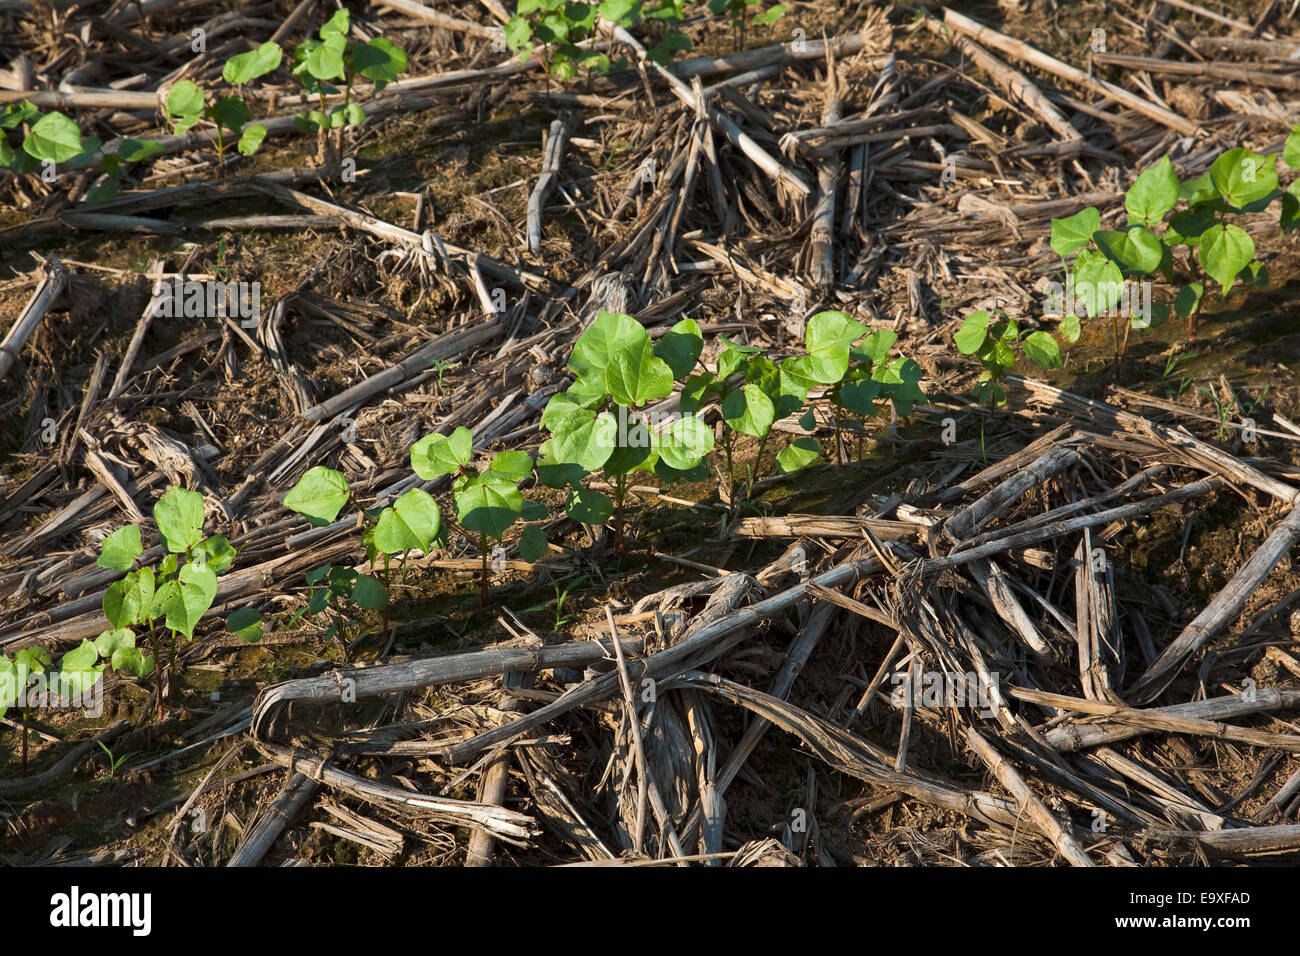 Agriculture - Rows of cotton seedlings at the 3-4 true leaf stage, planted no-till in residue of the previous year Stock Photo